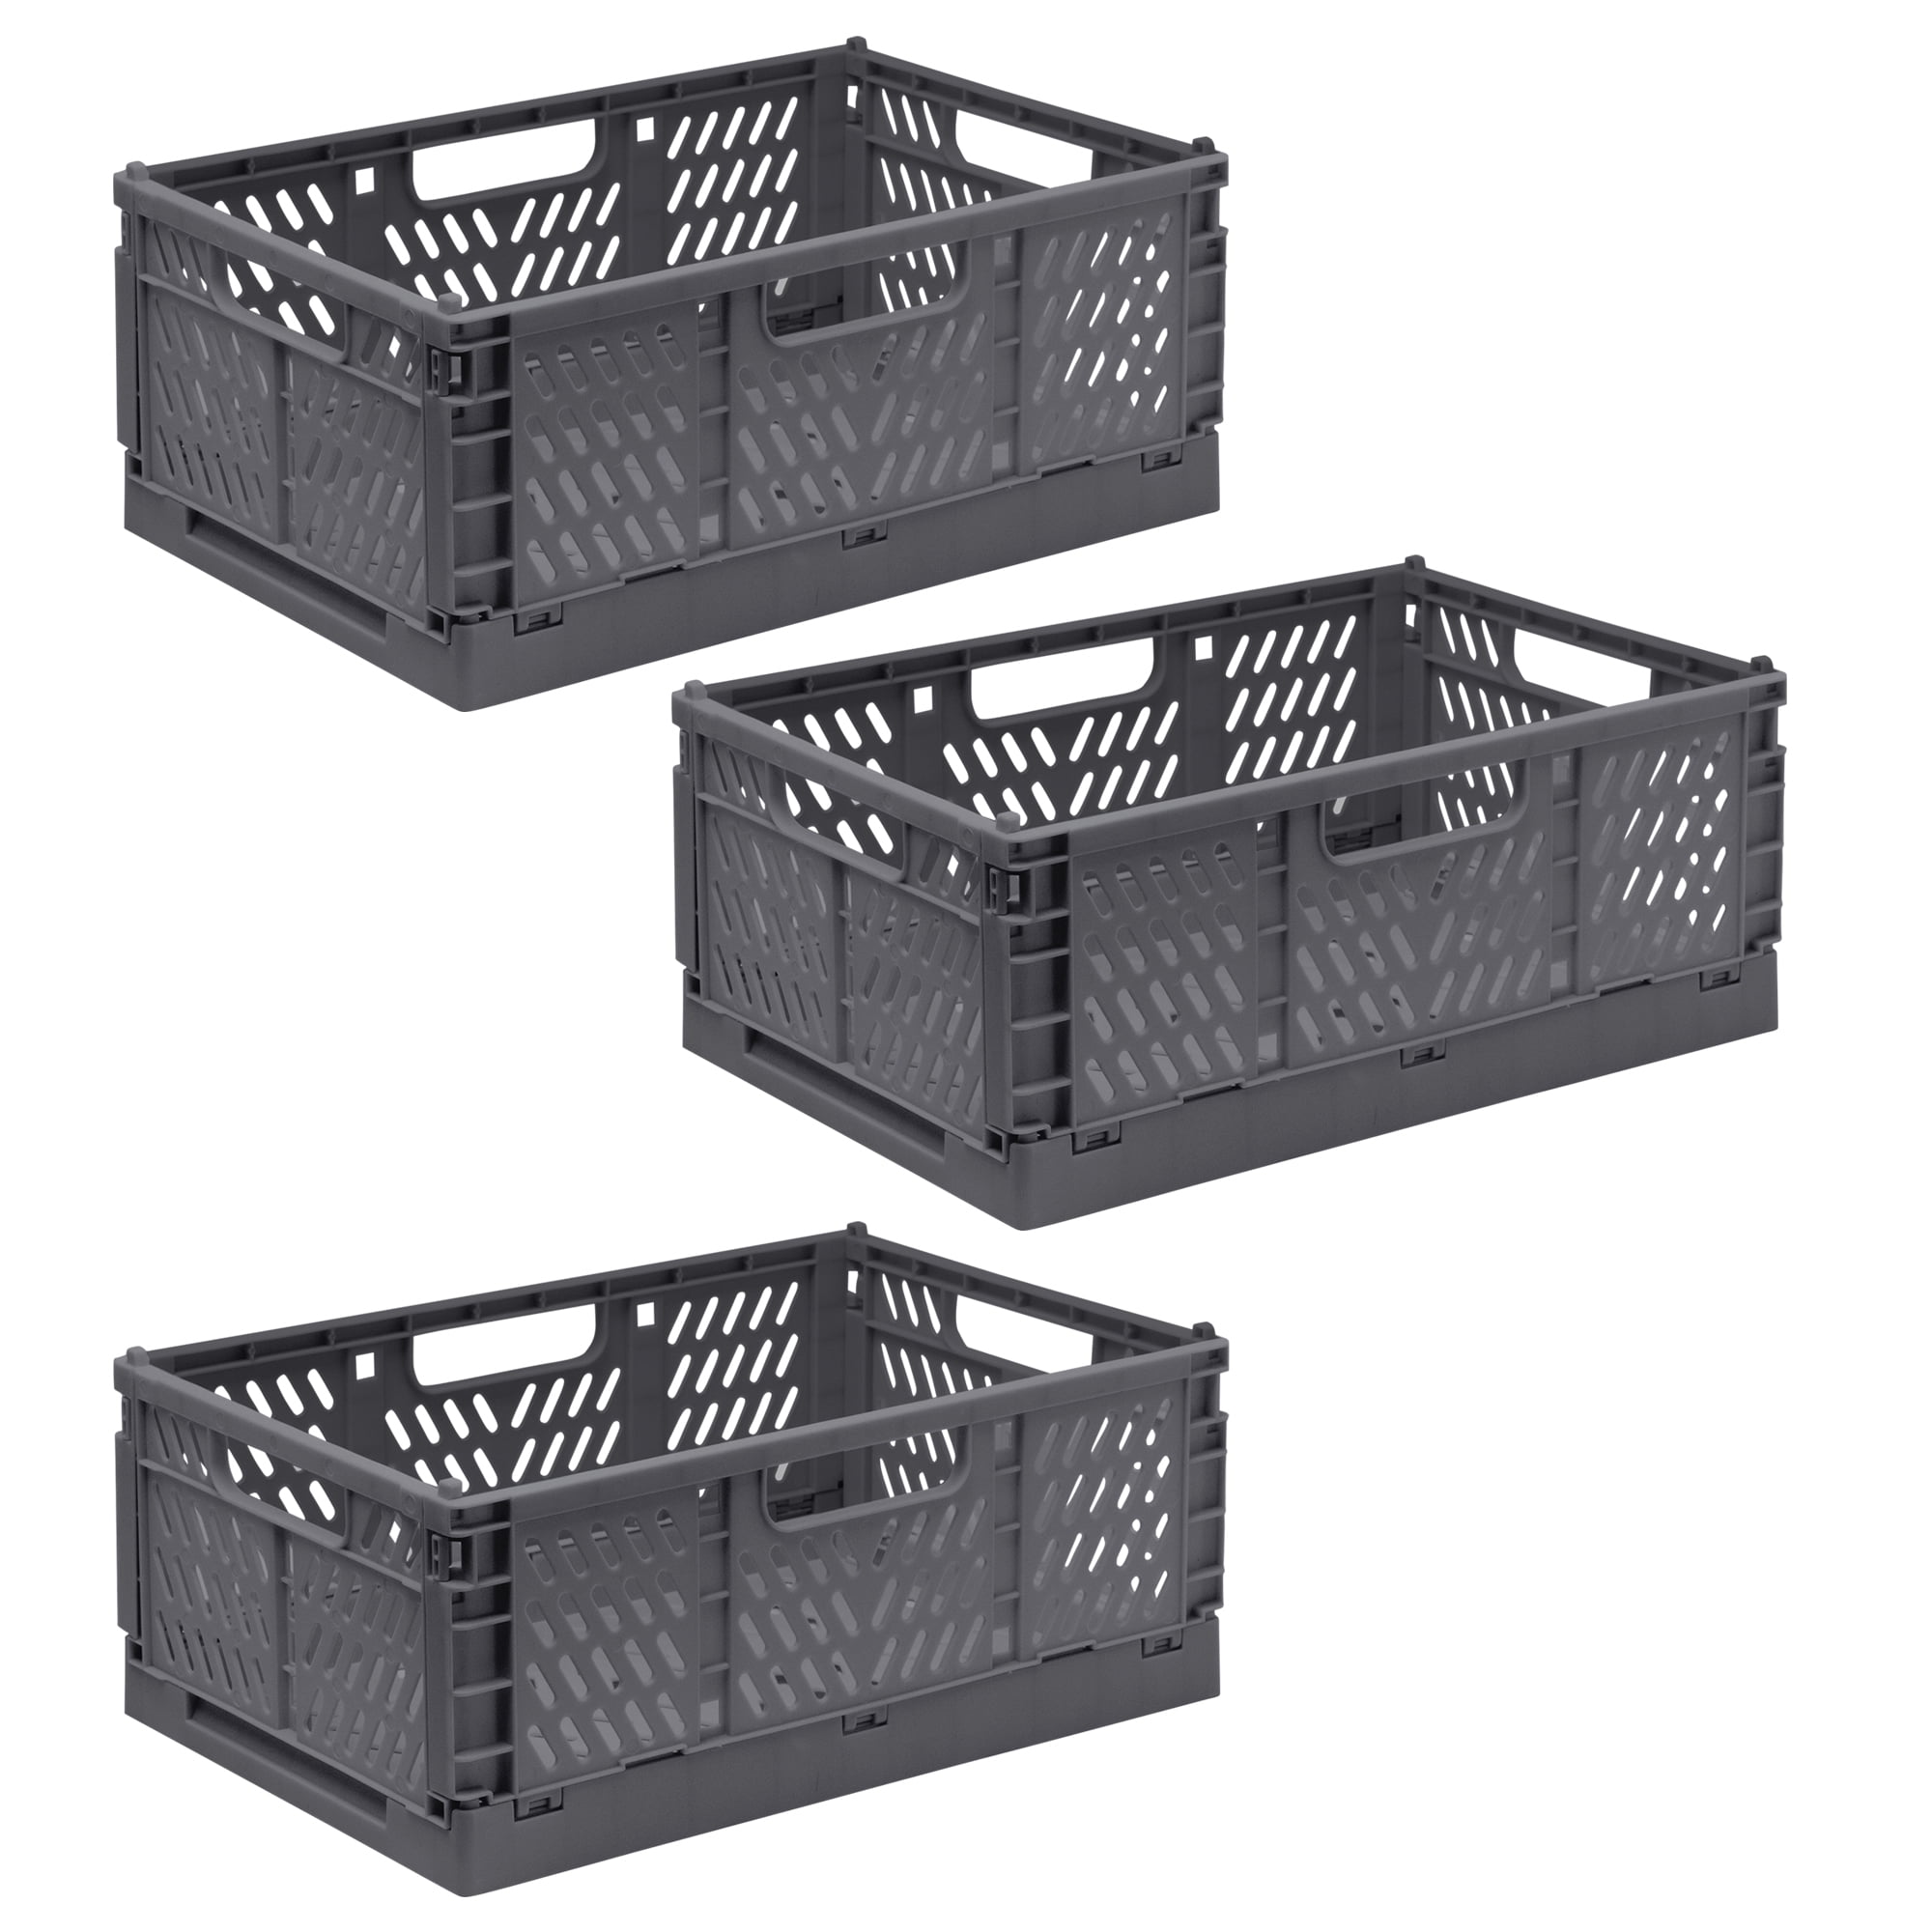 6 X 32 LITRE FOLDABLE CRATE PLASTIC STORAGE BOX BASKET CRATES FLAT GOOD FOR CARS 